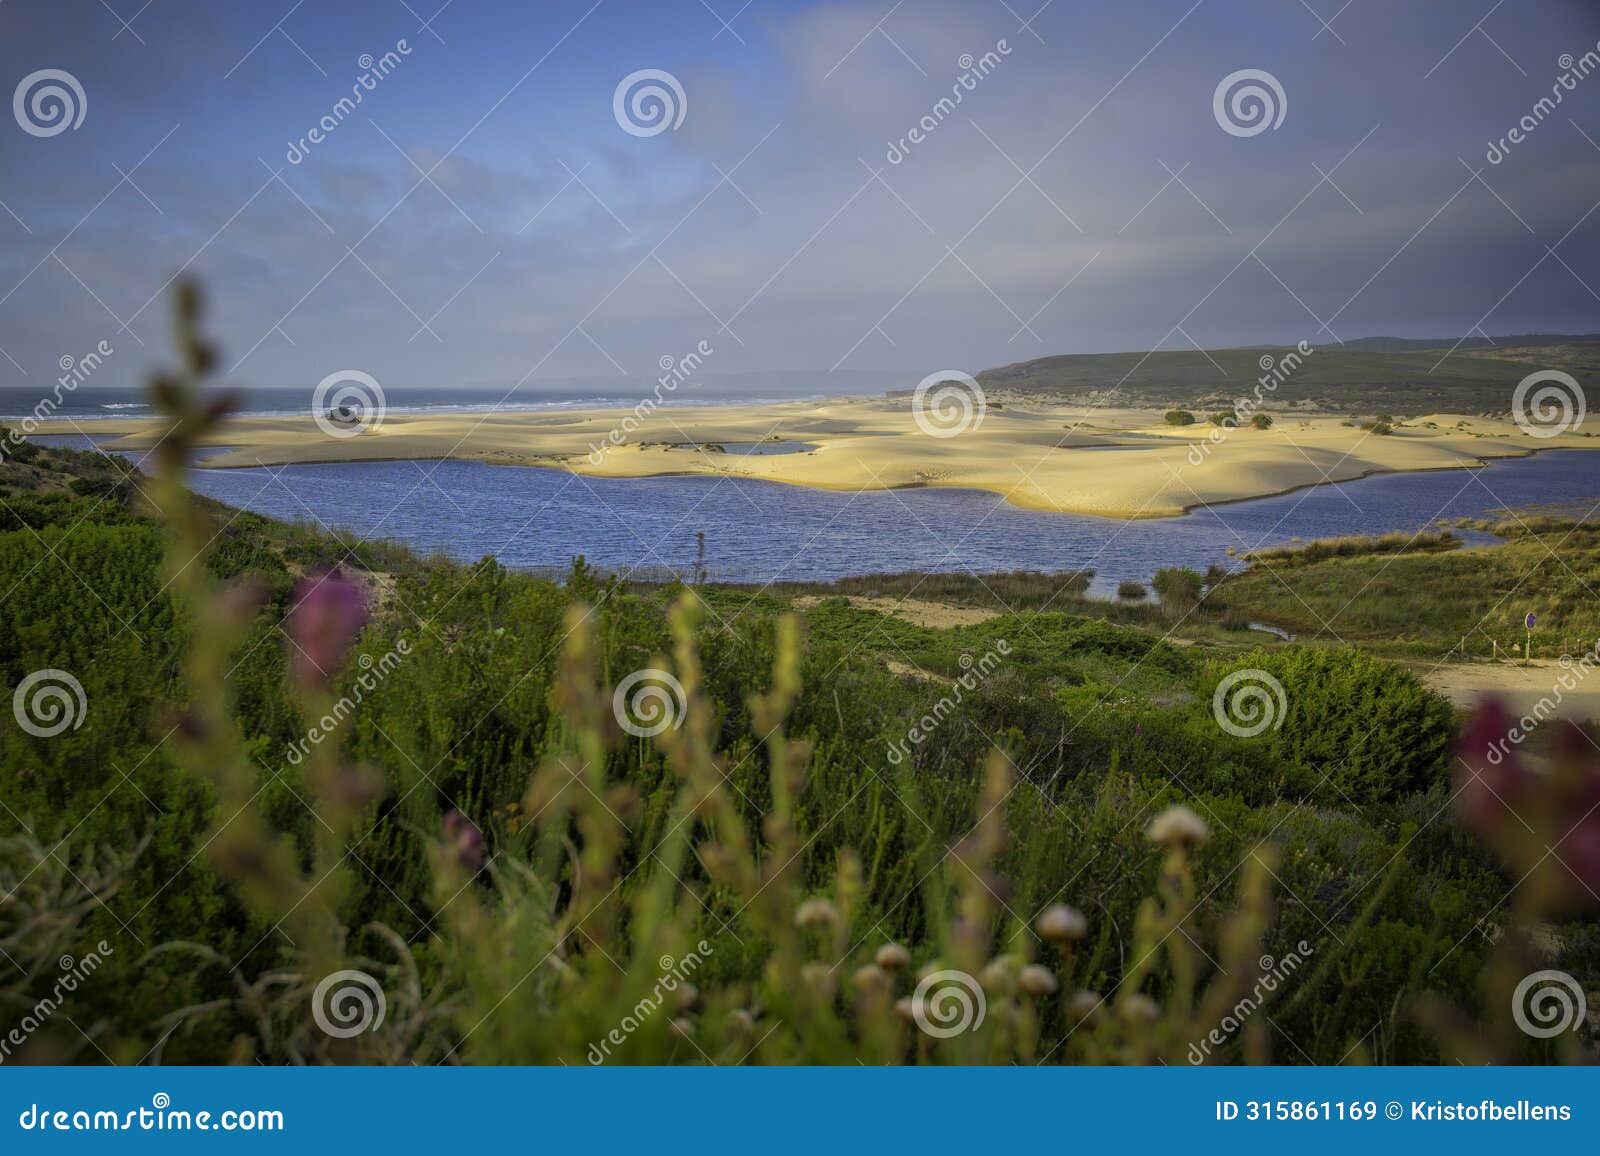 landscape view on bordeira beach near carrapateira on the costa vicentina in the algarve in portugal